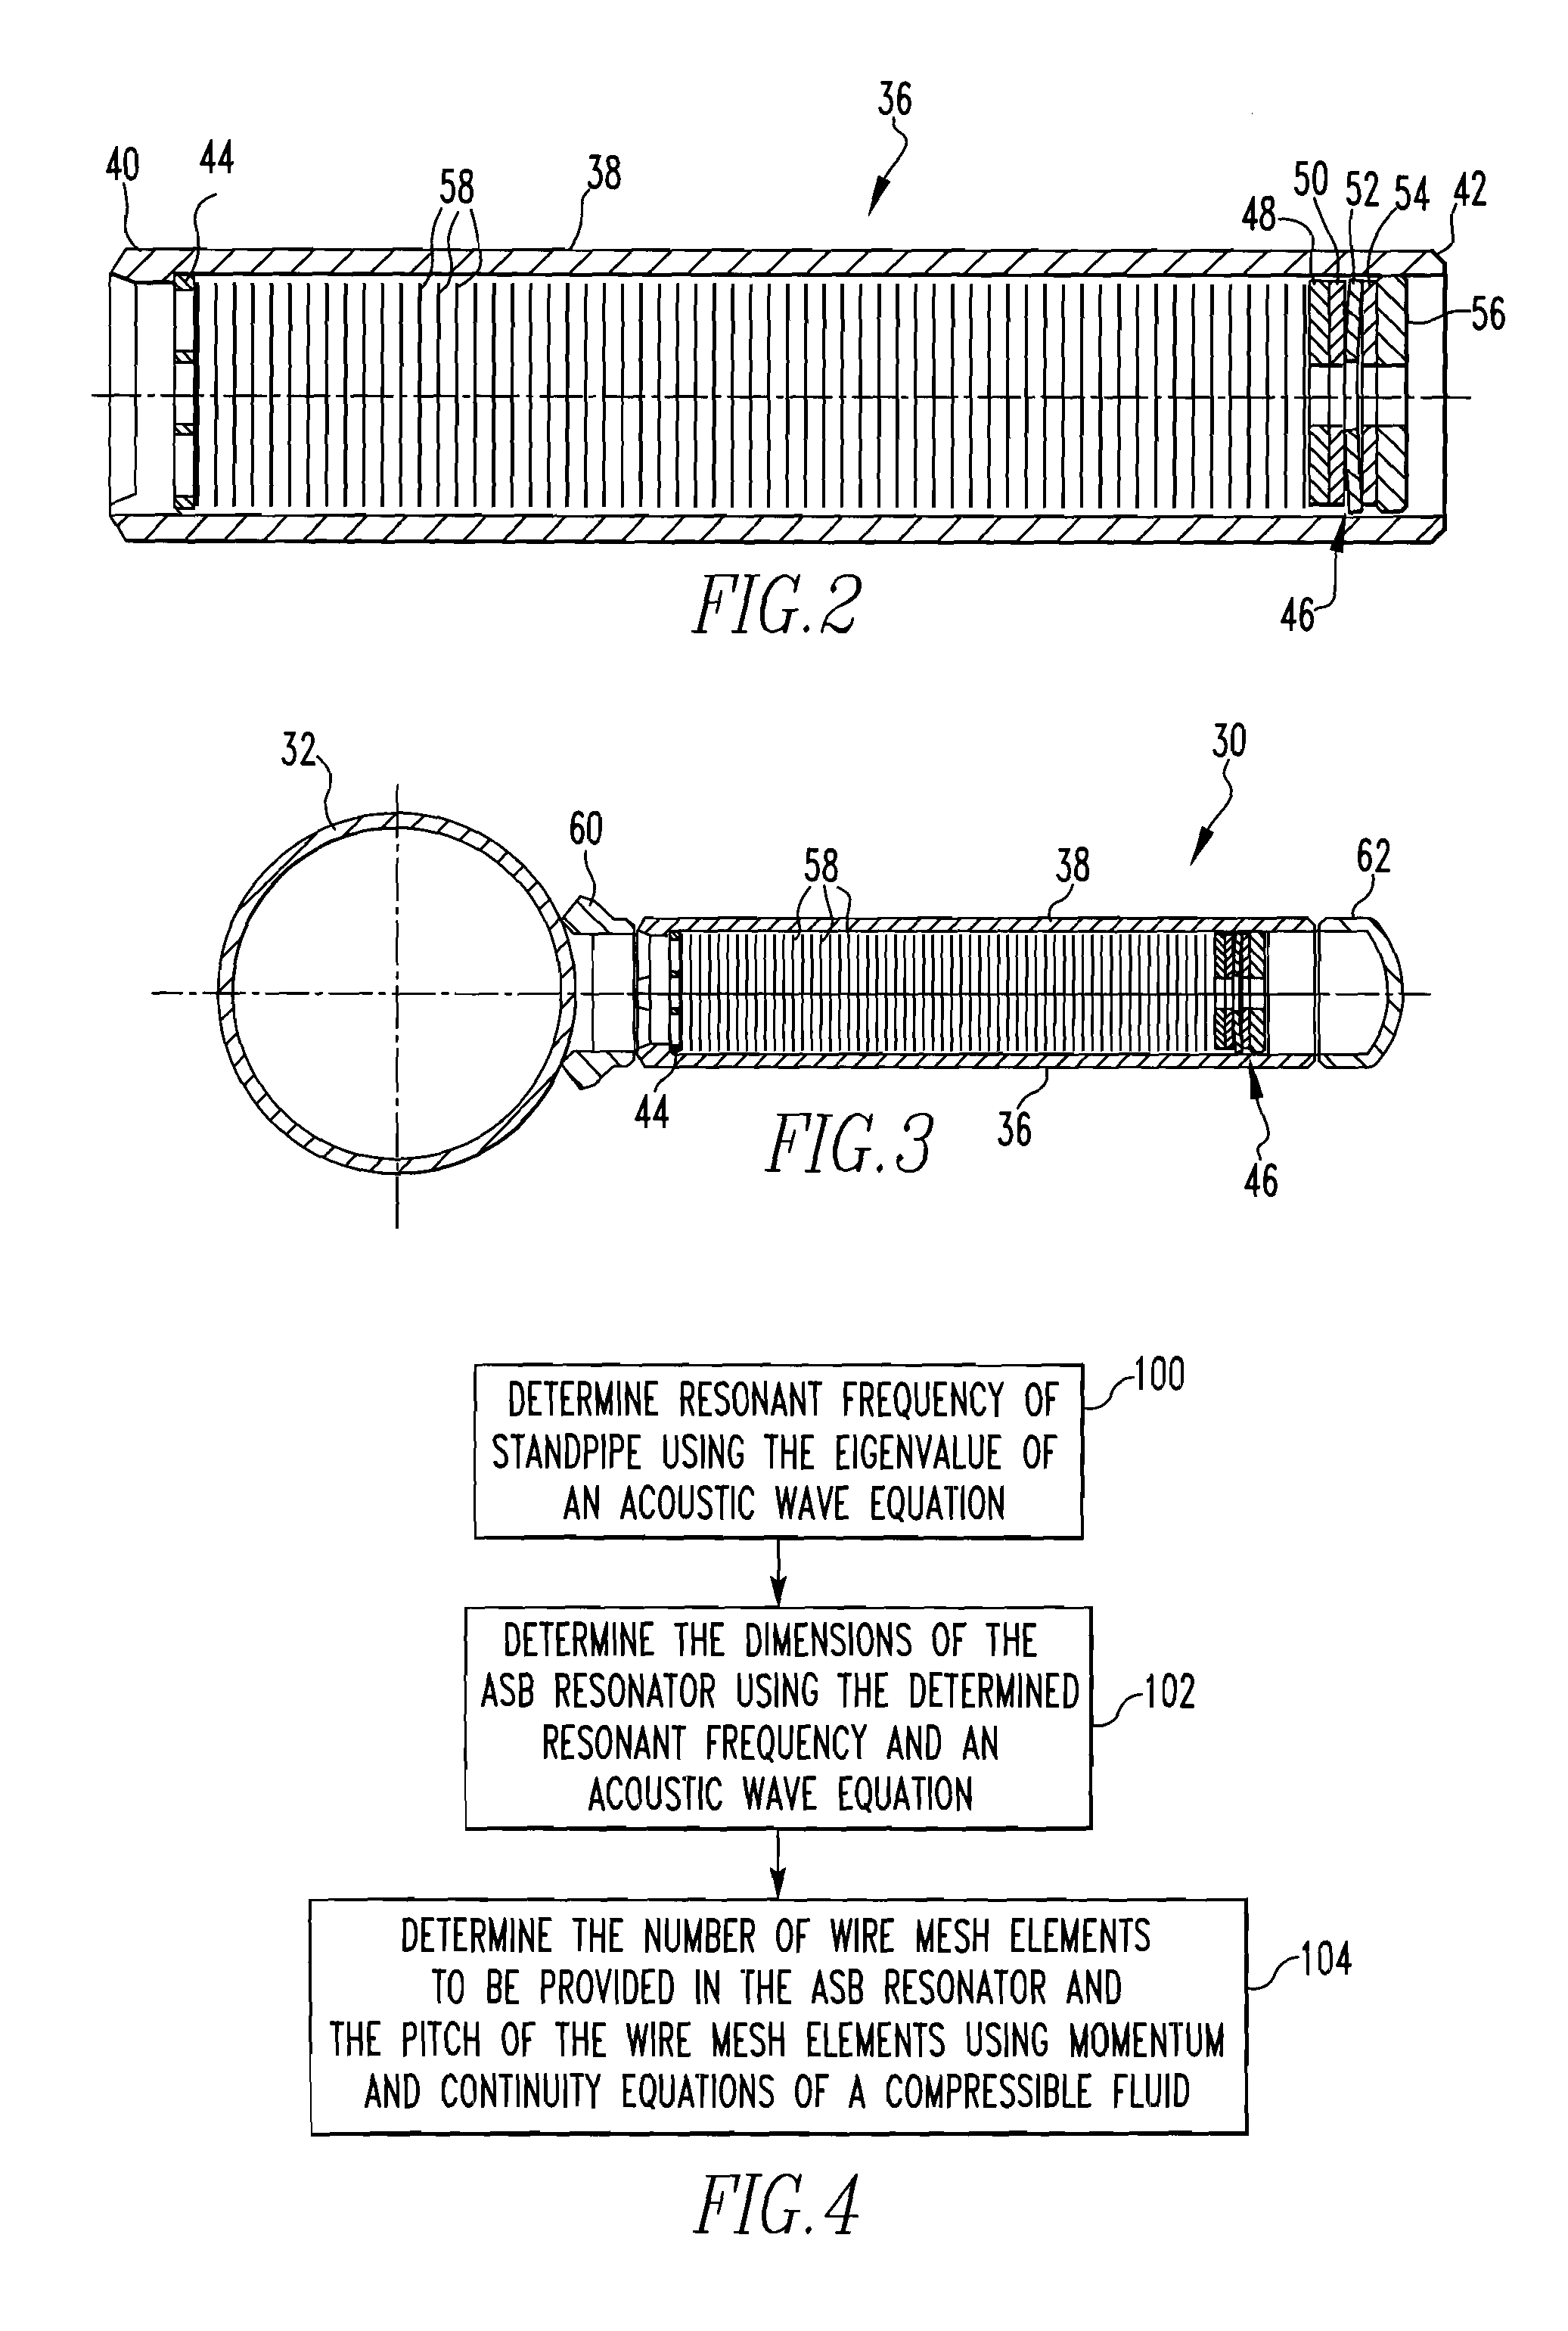 Noise and vibration mitigation system for nuclear reactors employing an acoustic side branch resonator